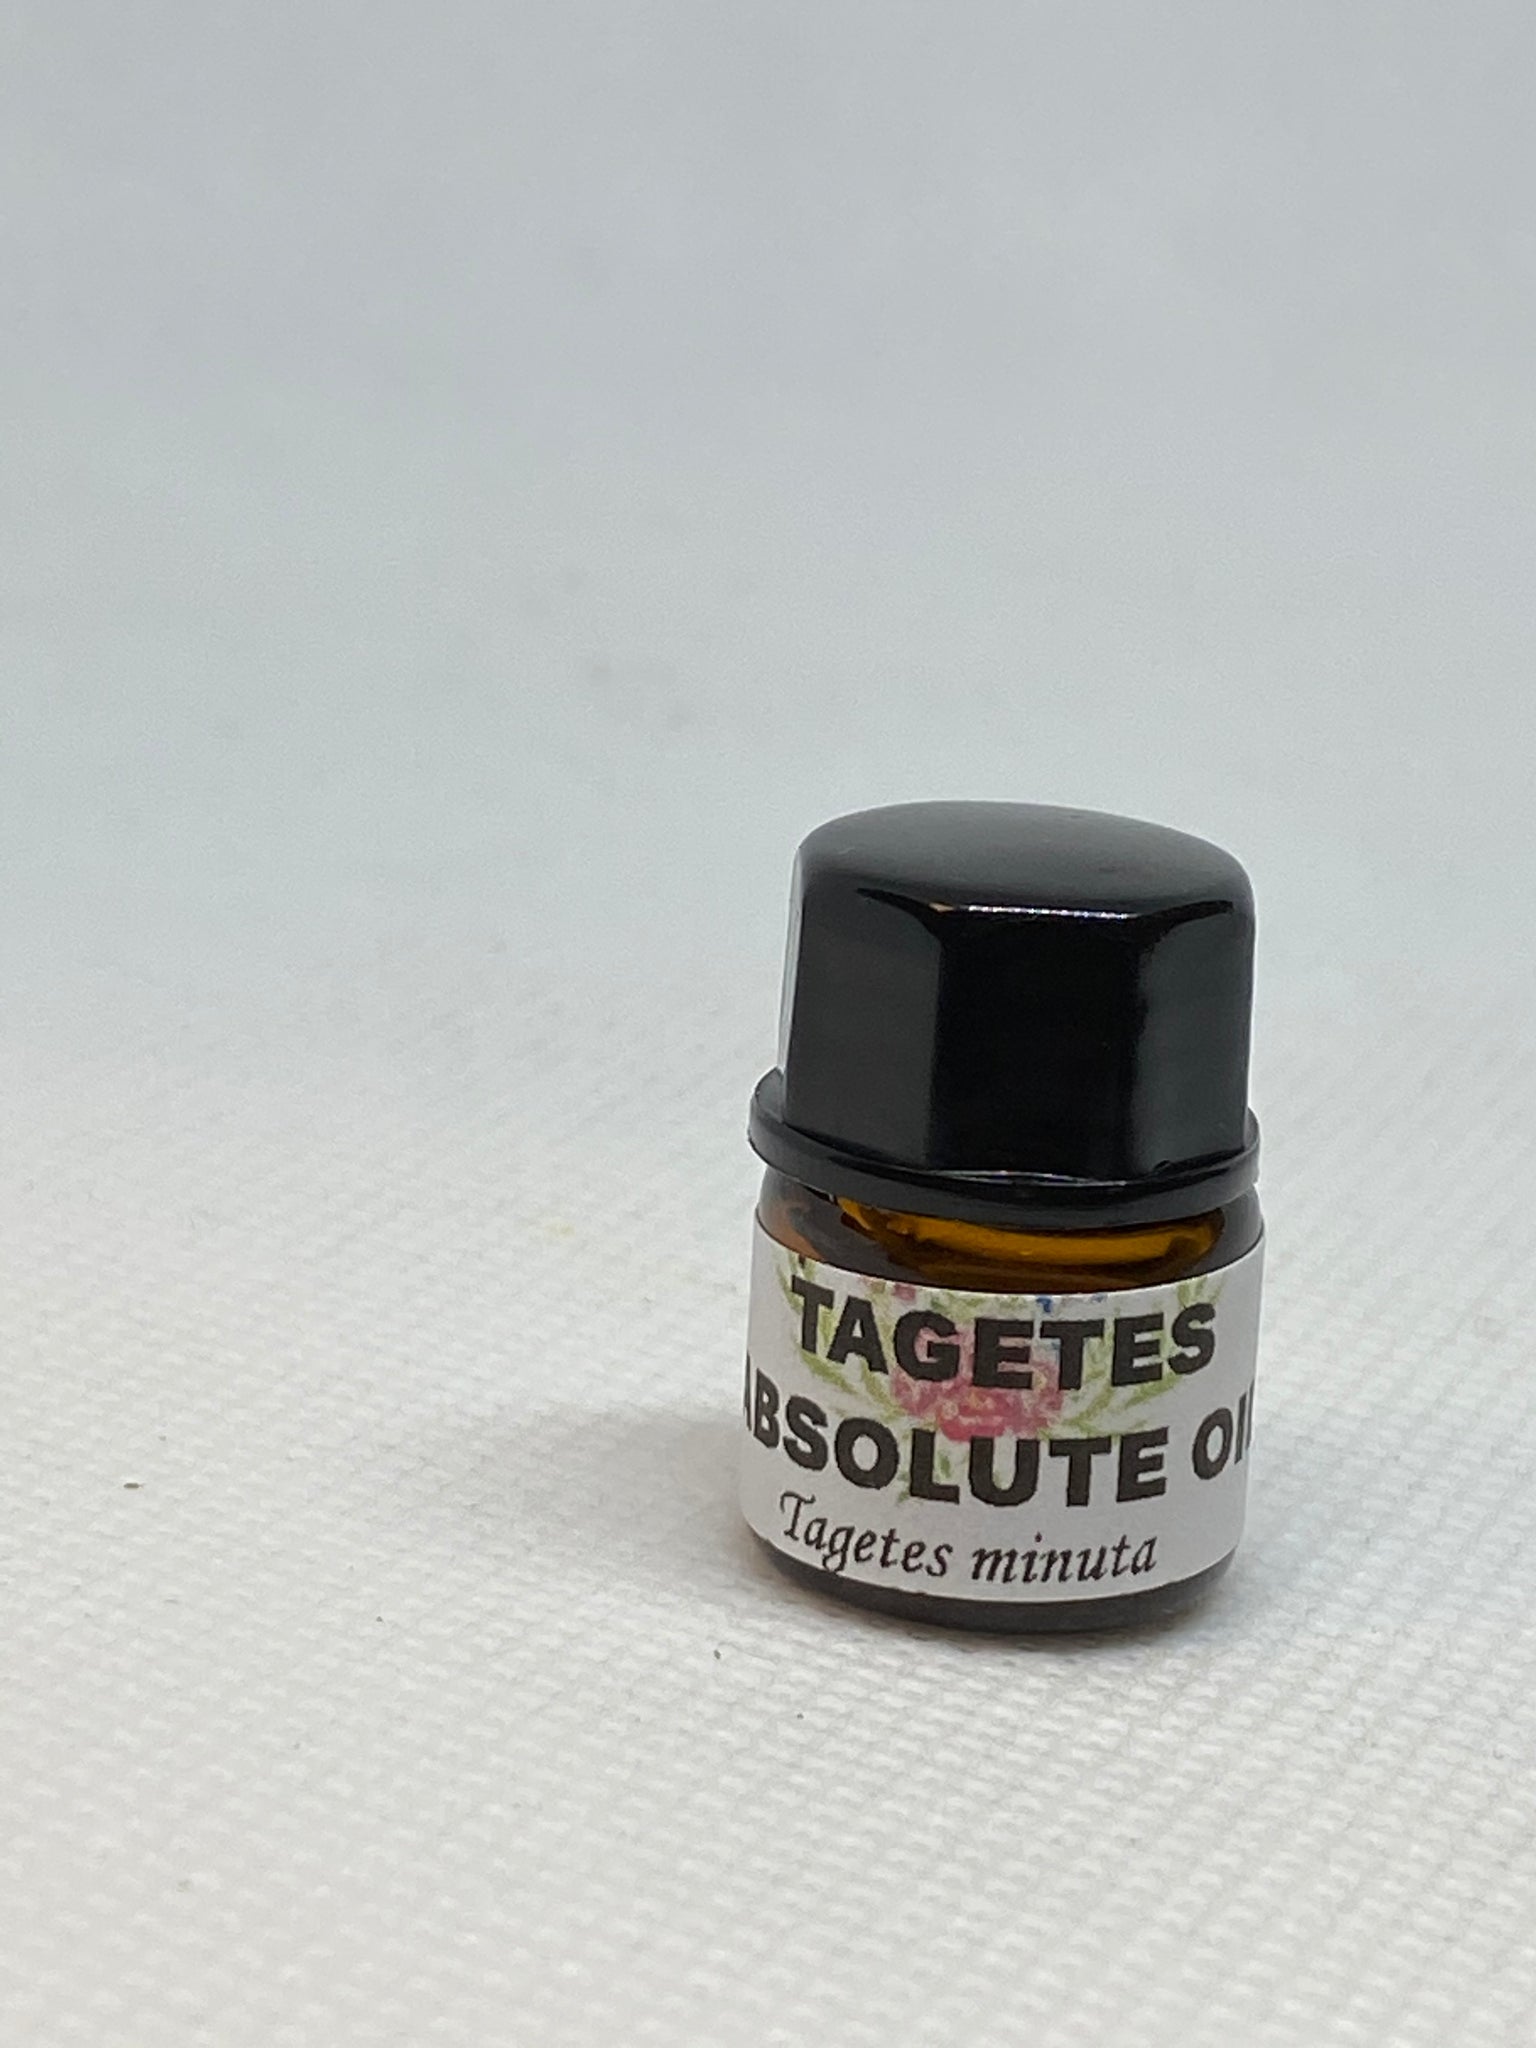 Tagetes Absolute Oil